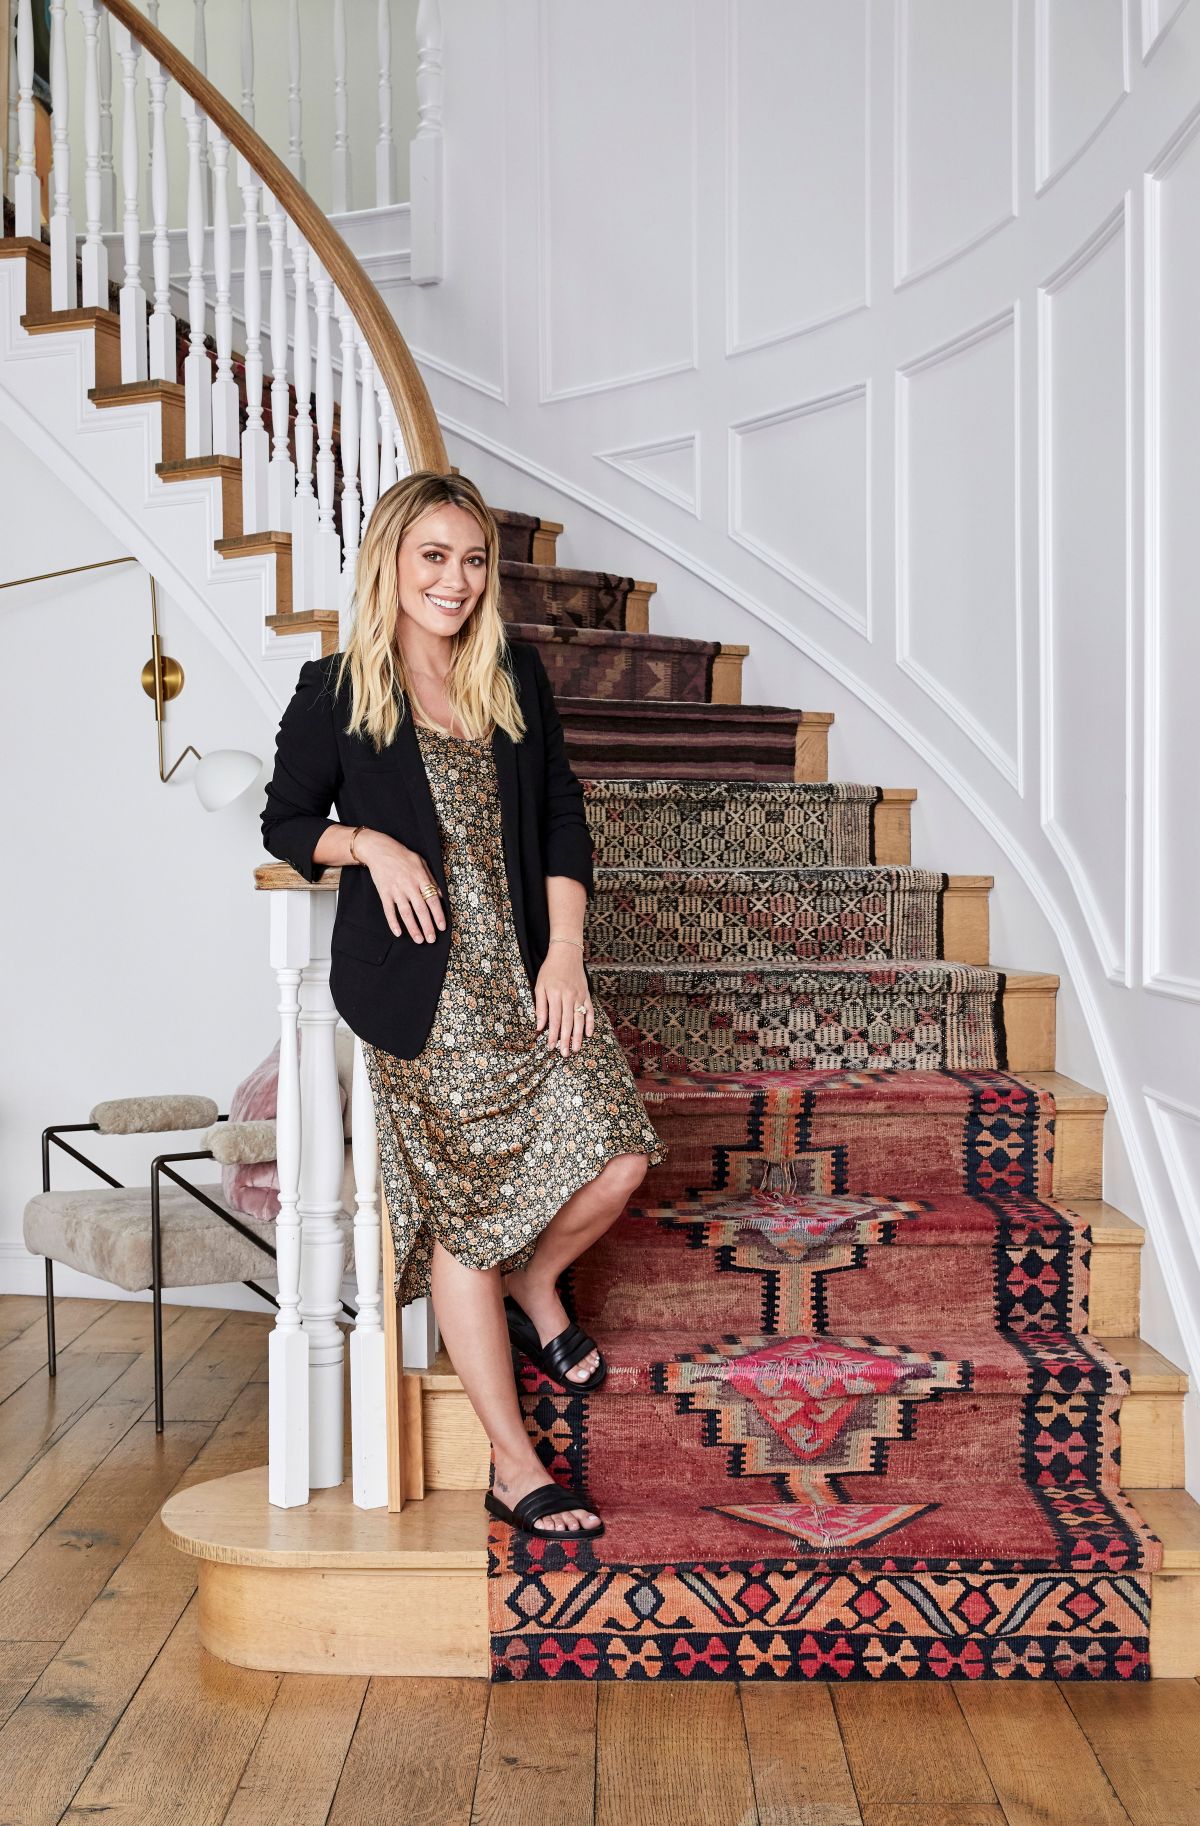 Hilary Duff in Architectural Digest Magazine, September 2020 1